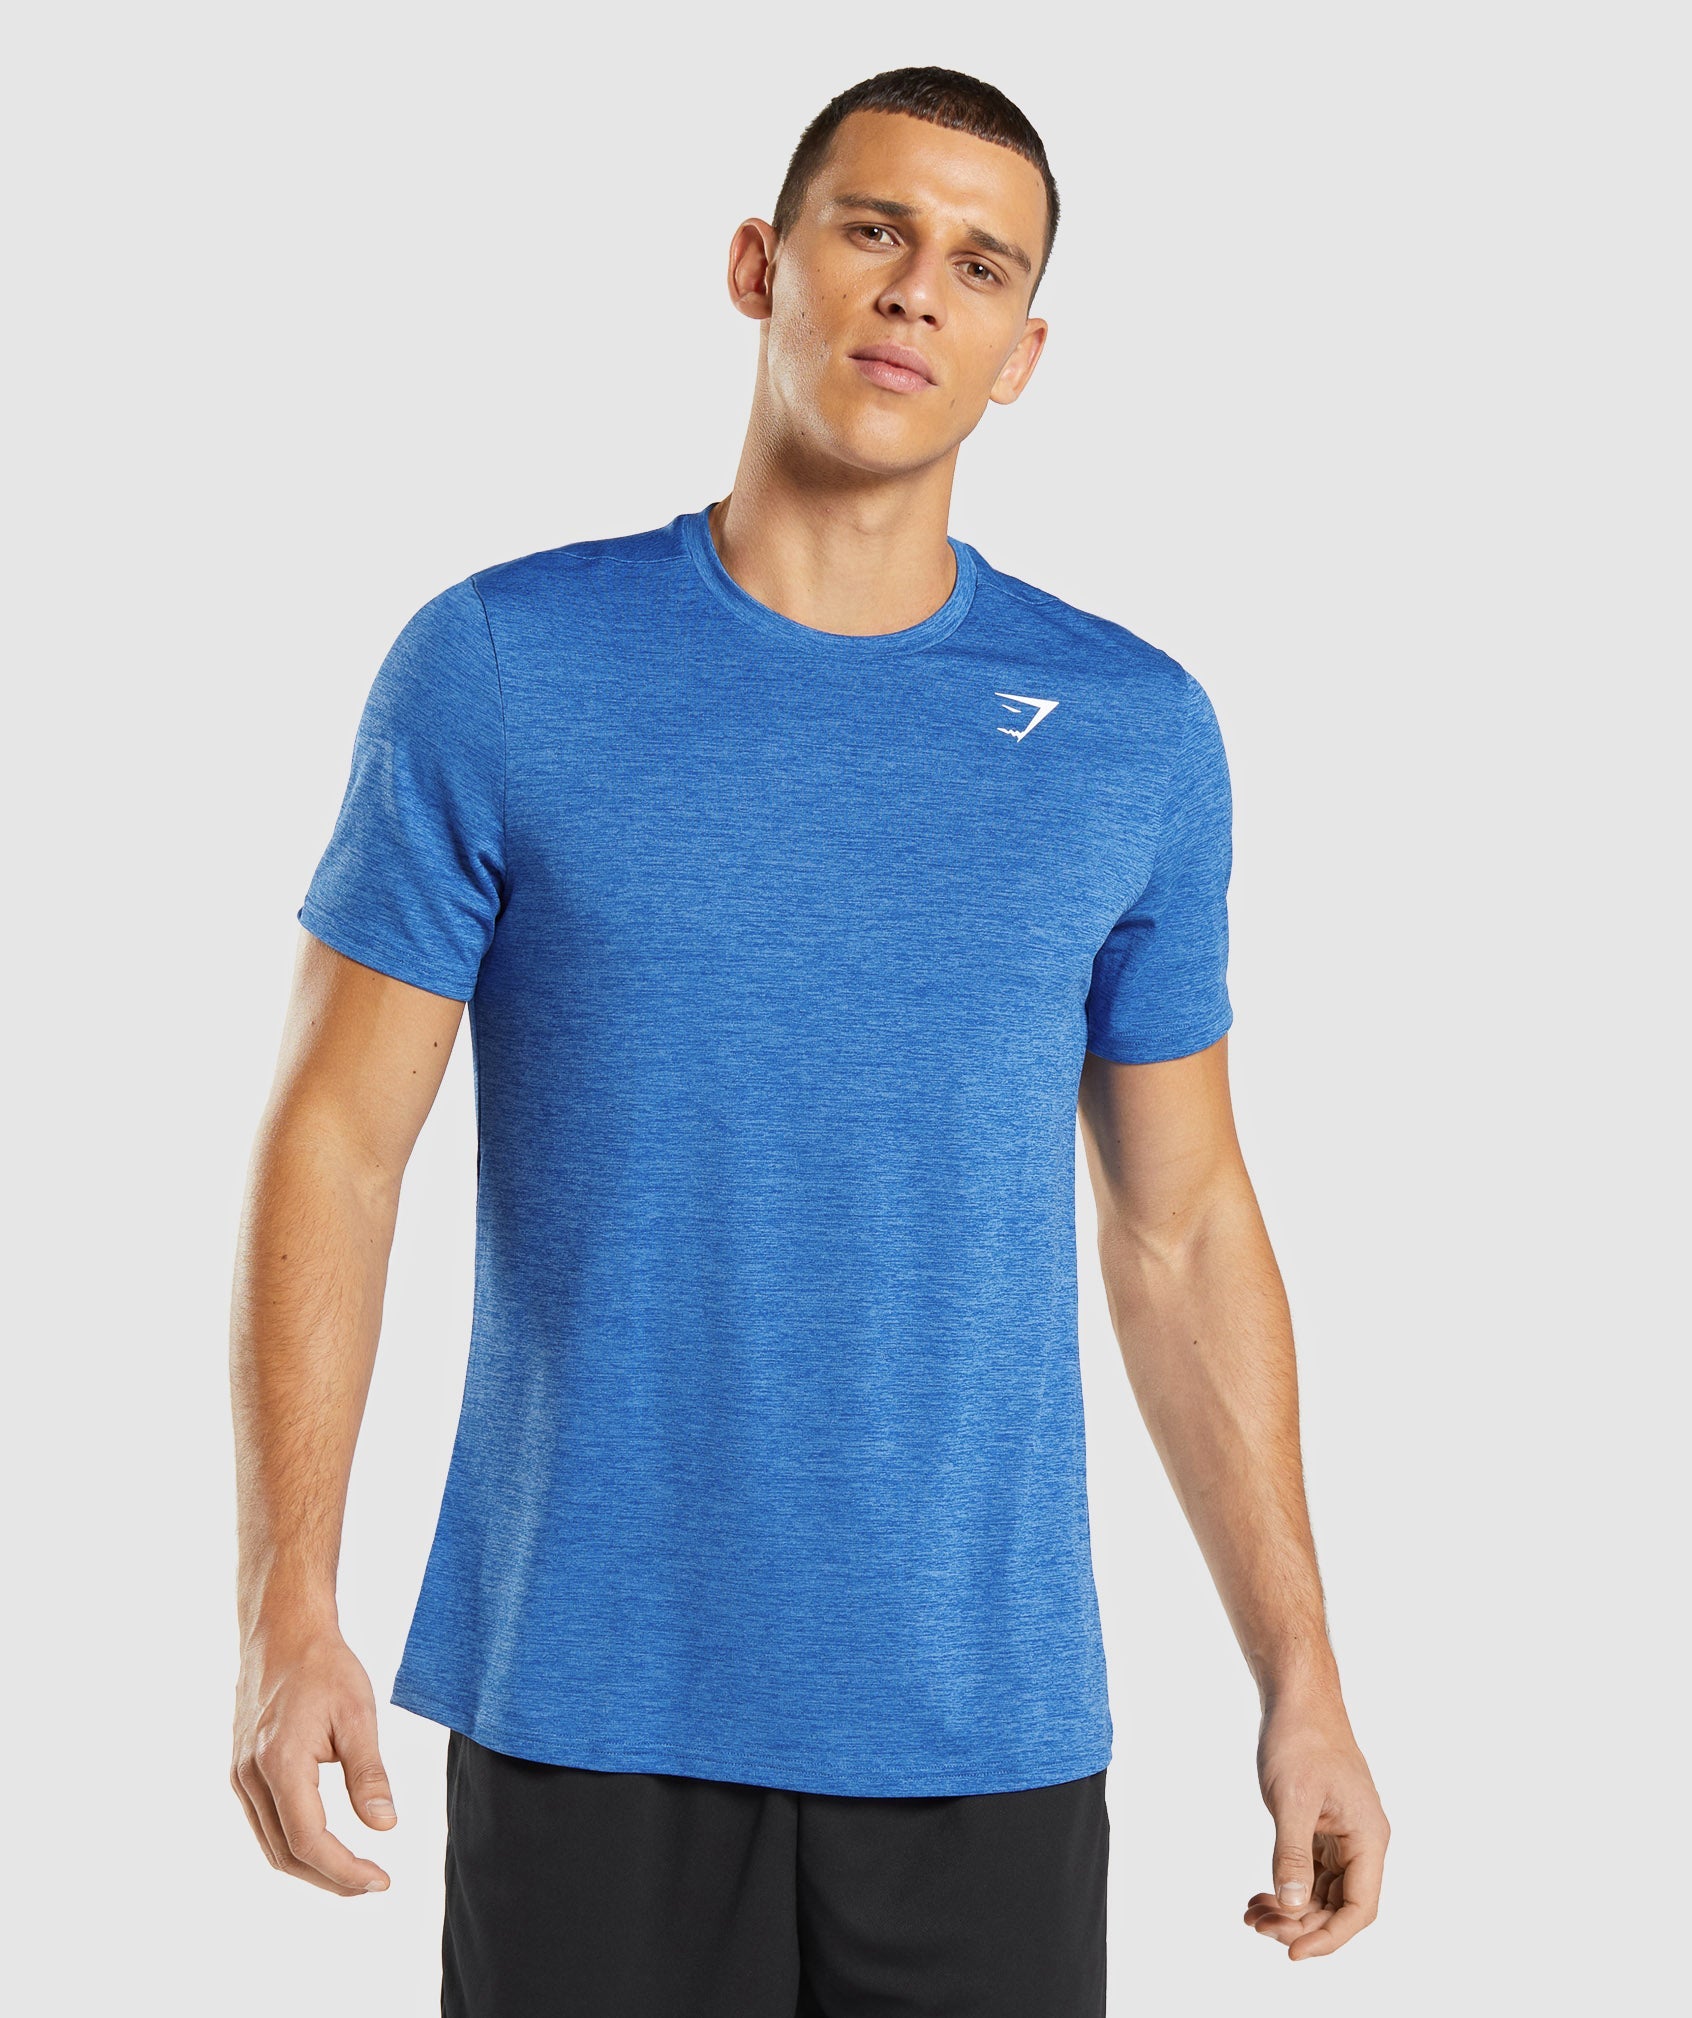 Arrival Marl T-Shirt in Athletic Blue/Javelin Blue Marl - view 1